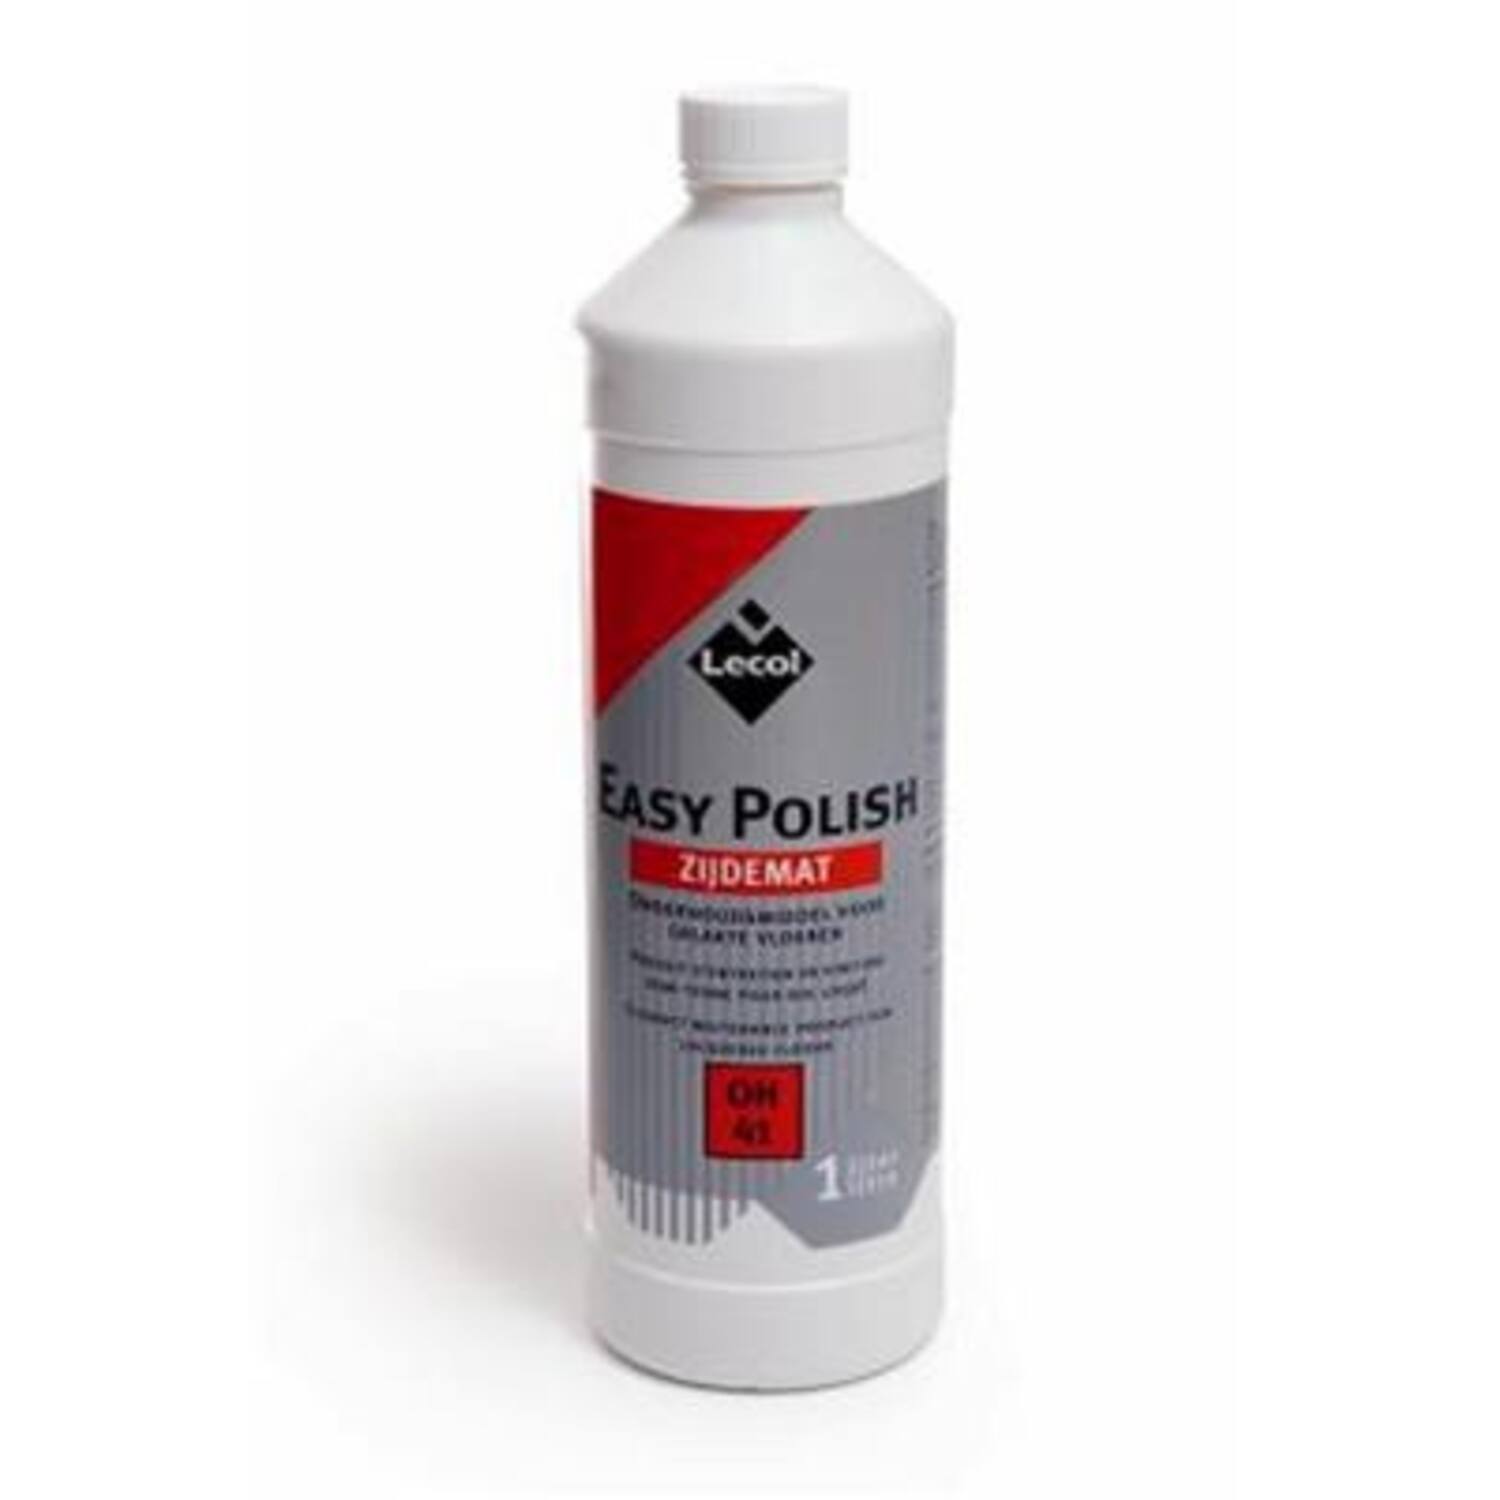 LECOL Easy Polish Zijdemat OH41 1ltr